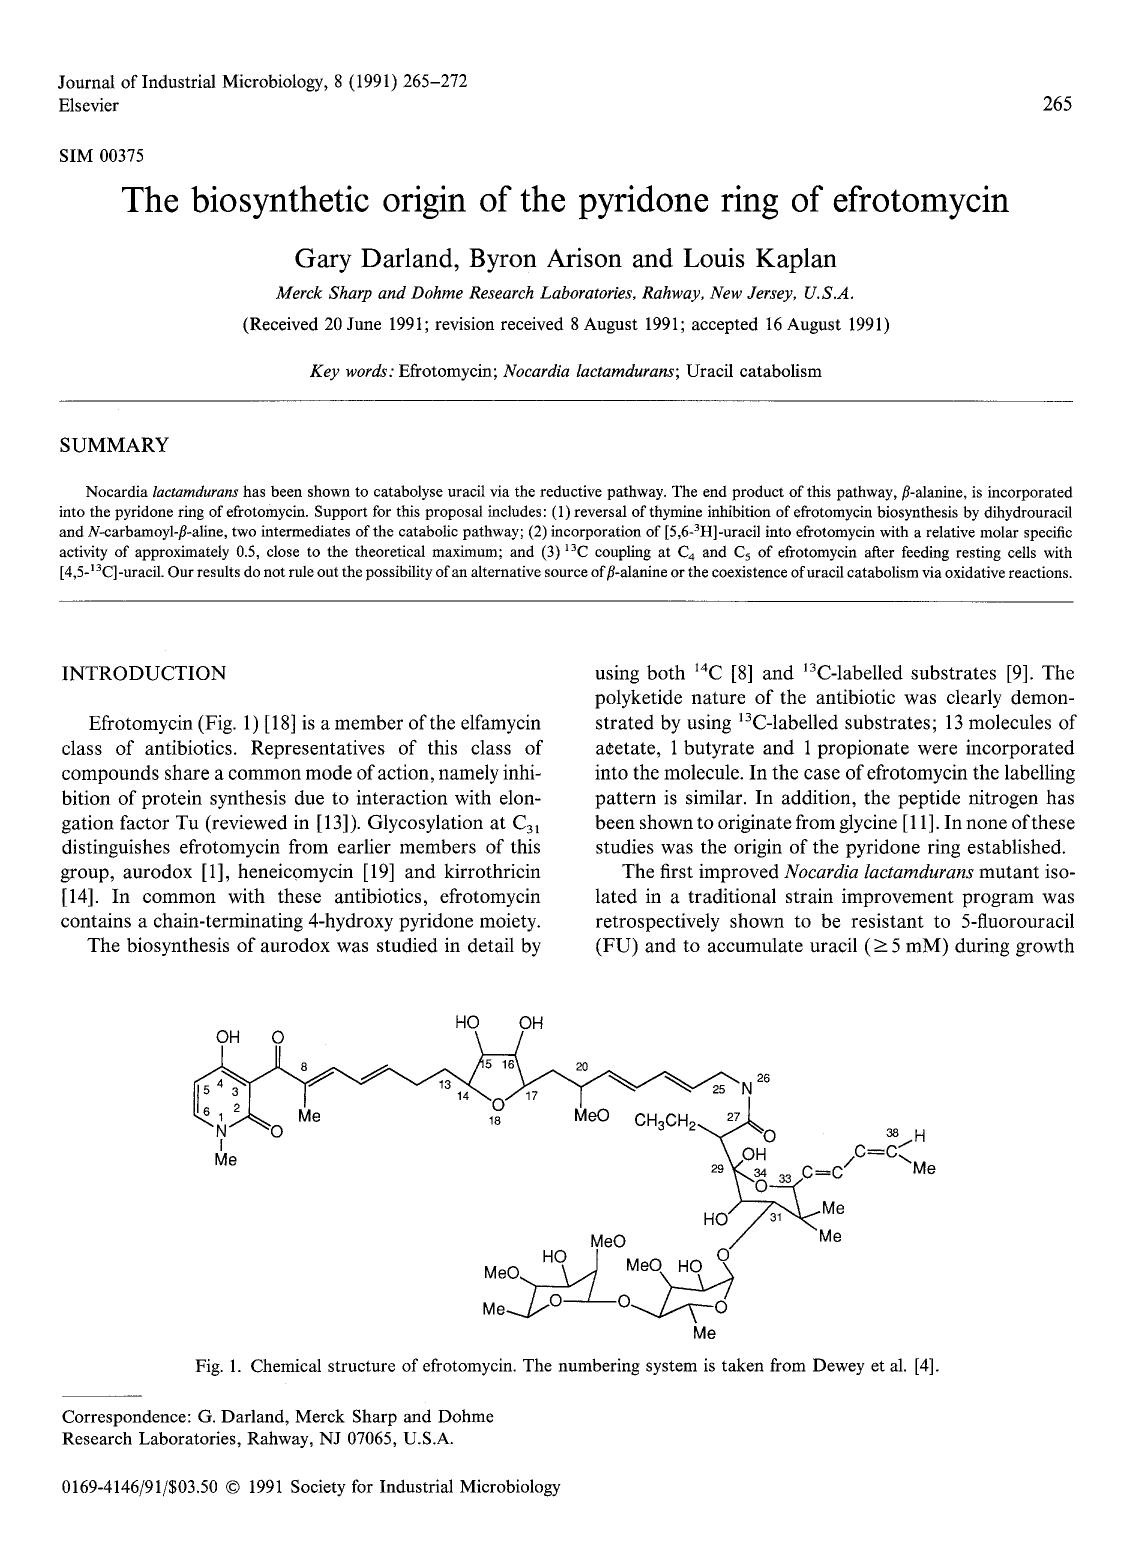 The biosynthetic origin of the pyridone ring of efrotomycin by Unknown